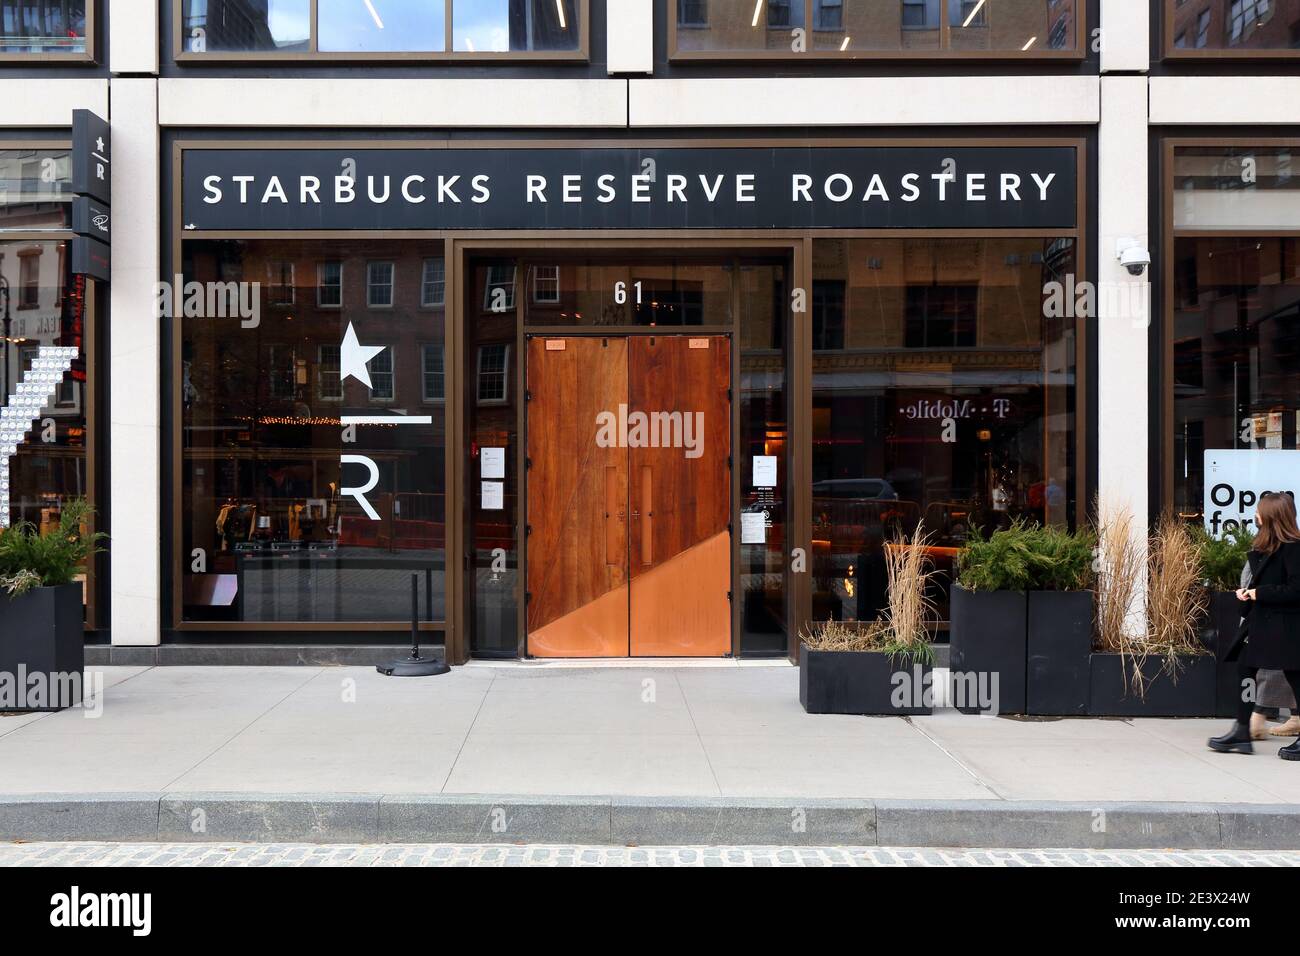 Starbucks Reserve Roastery, 61 Ninth Ave, New York, NYC storefront photo of a coffee bar and restaurant in Manhattan's Chelsea neighborhood. Stock Photo